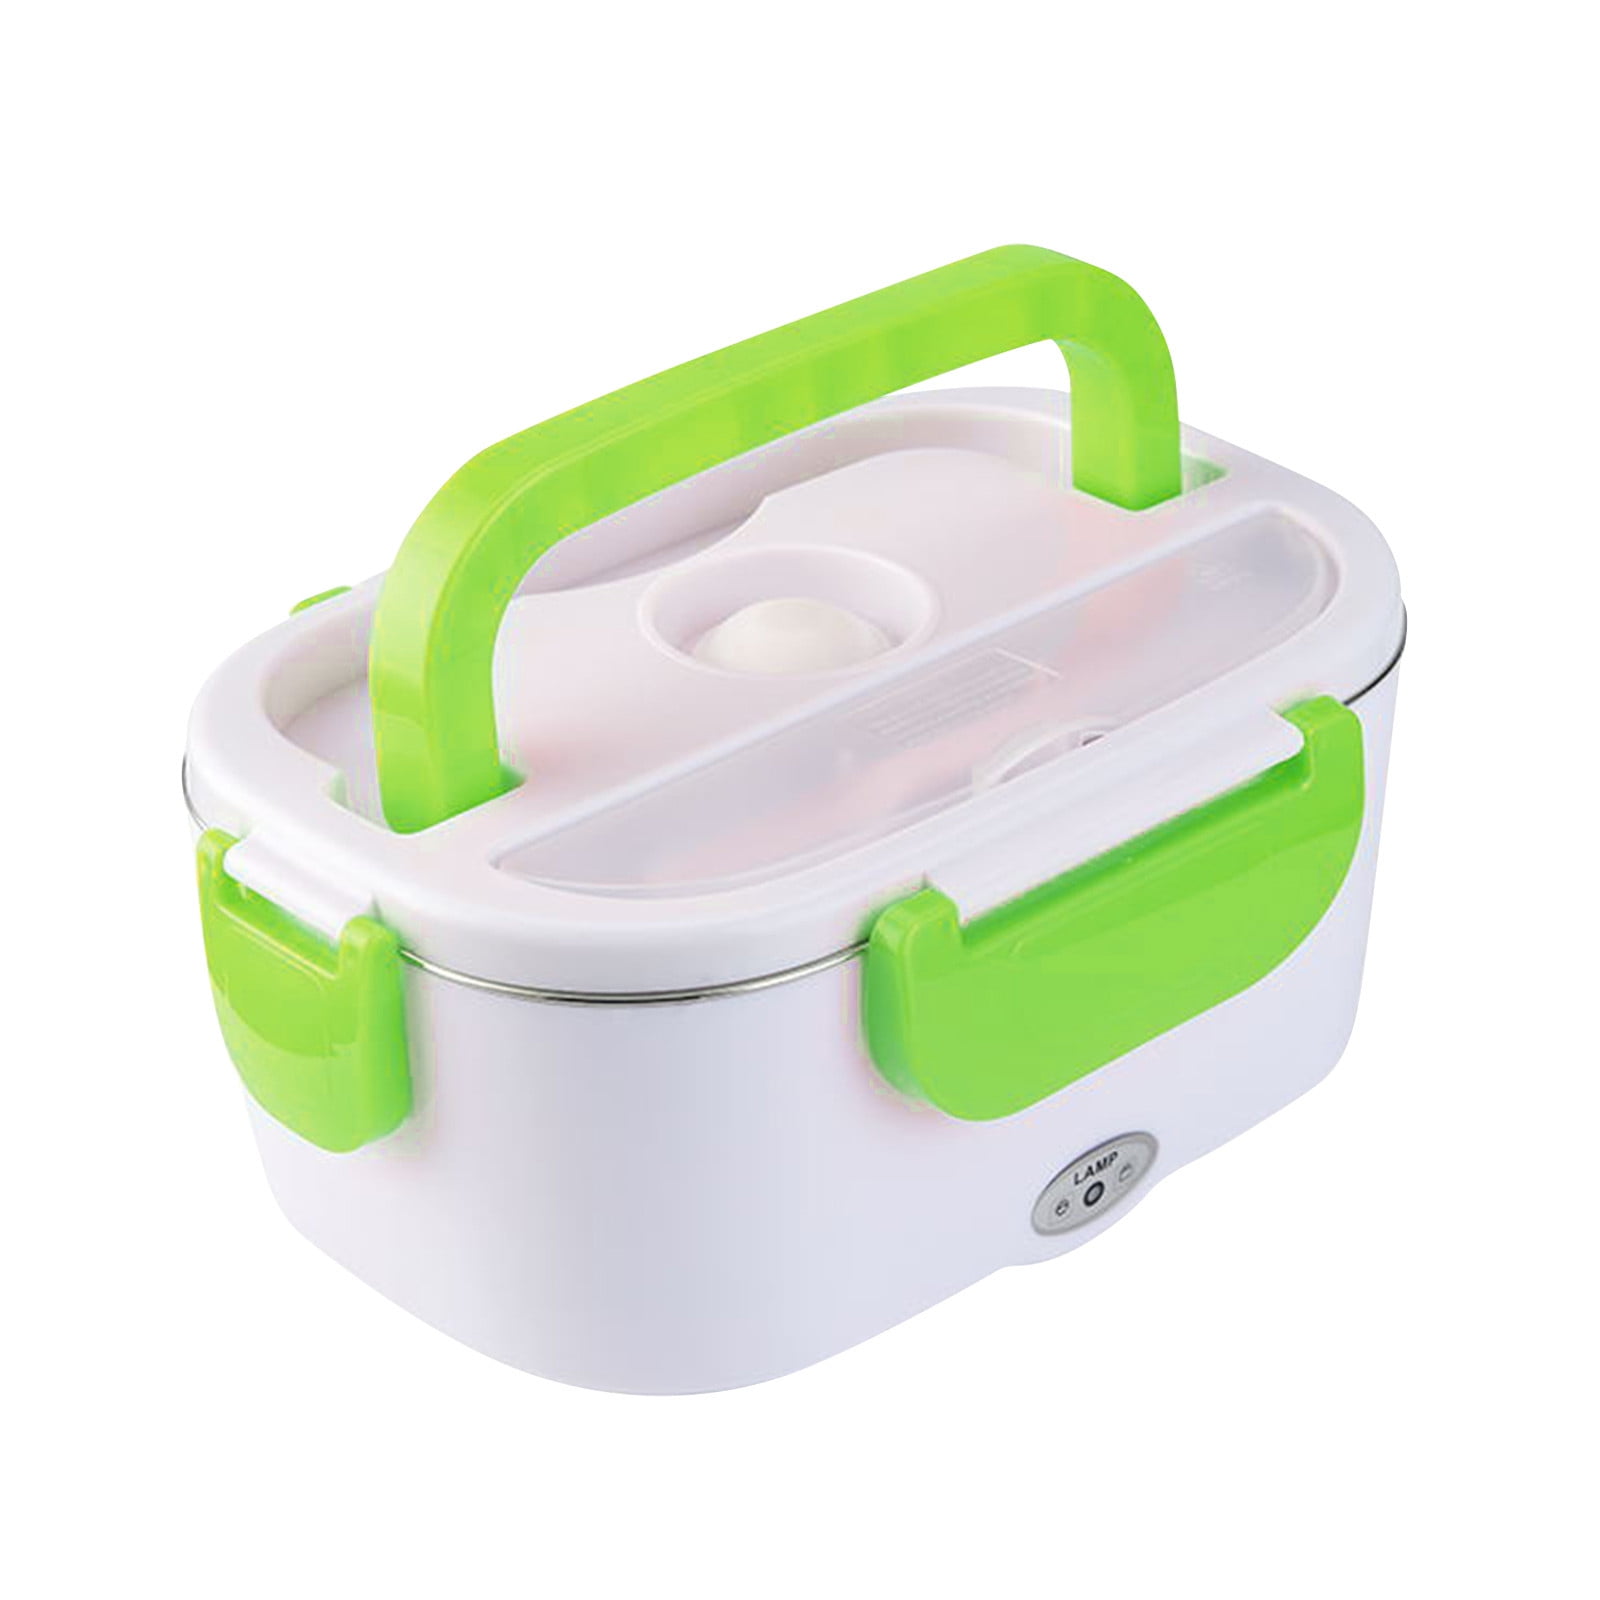 Electric Lunch Box, Heat Preservation and Heating Lunch Box, Self-Heating  Car Portable Lunch Box, Plug-In Rechargeable Lunch Box,Tableware,Green 